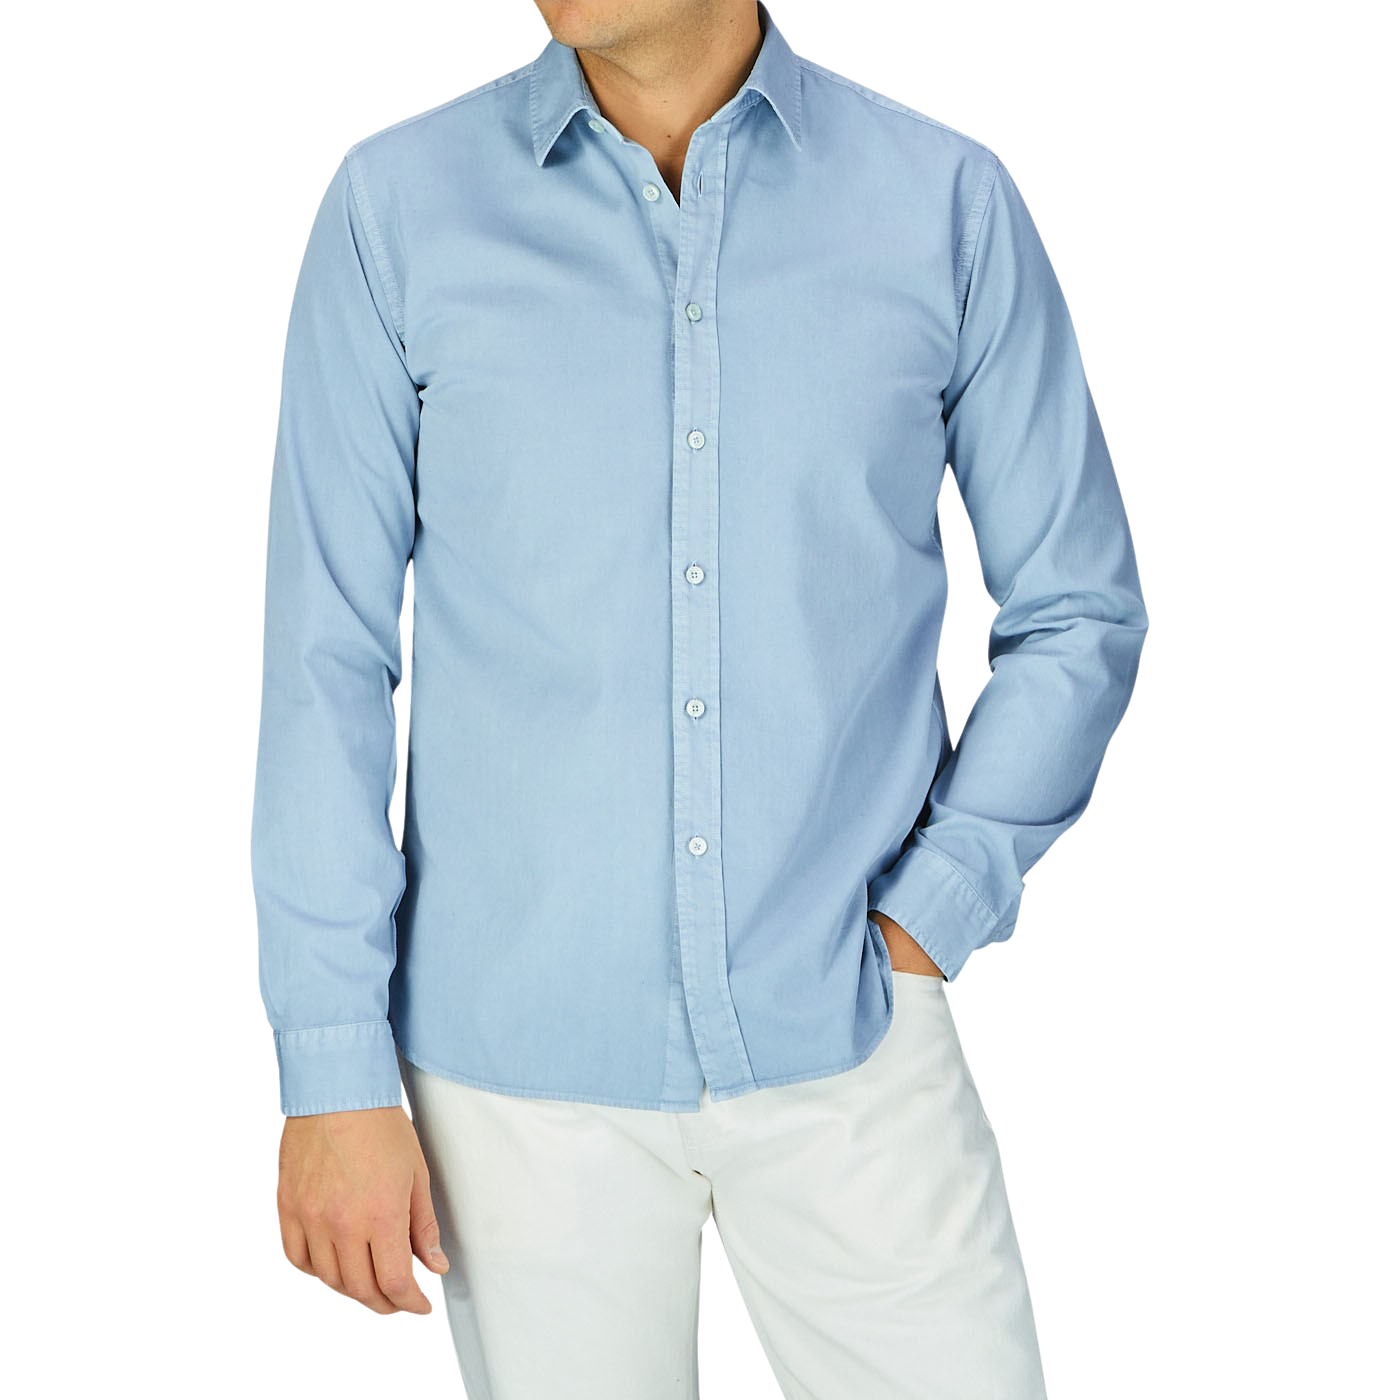 A person wearing a Xacus Light Blue Washed Cotton Twill Legacy Shirt and white pants.